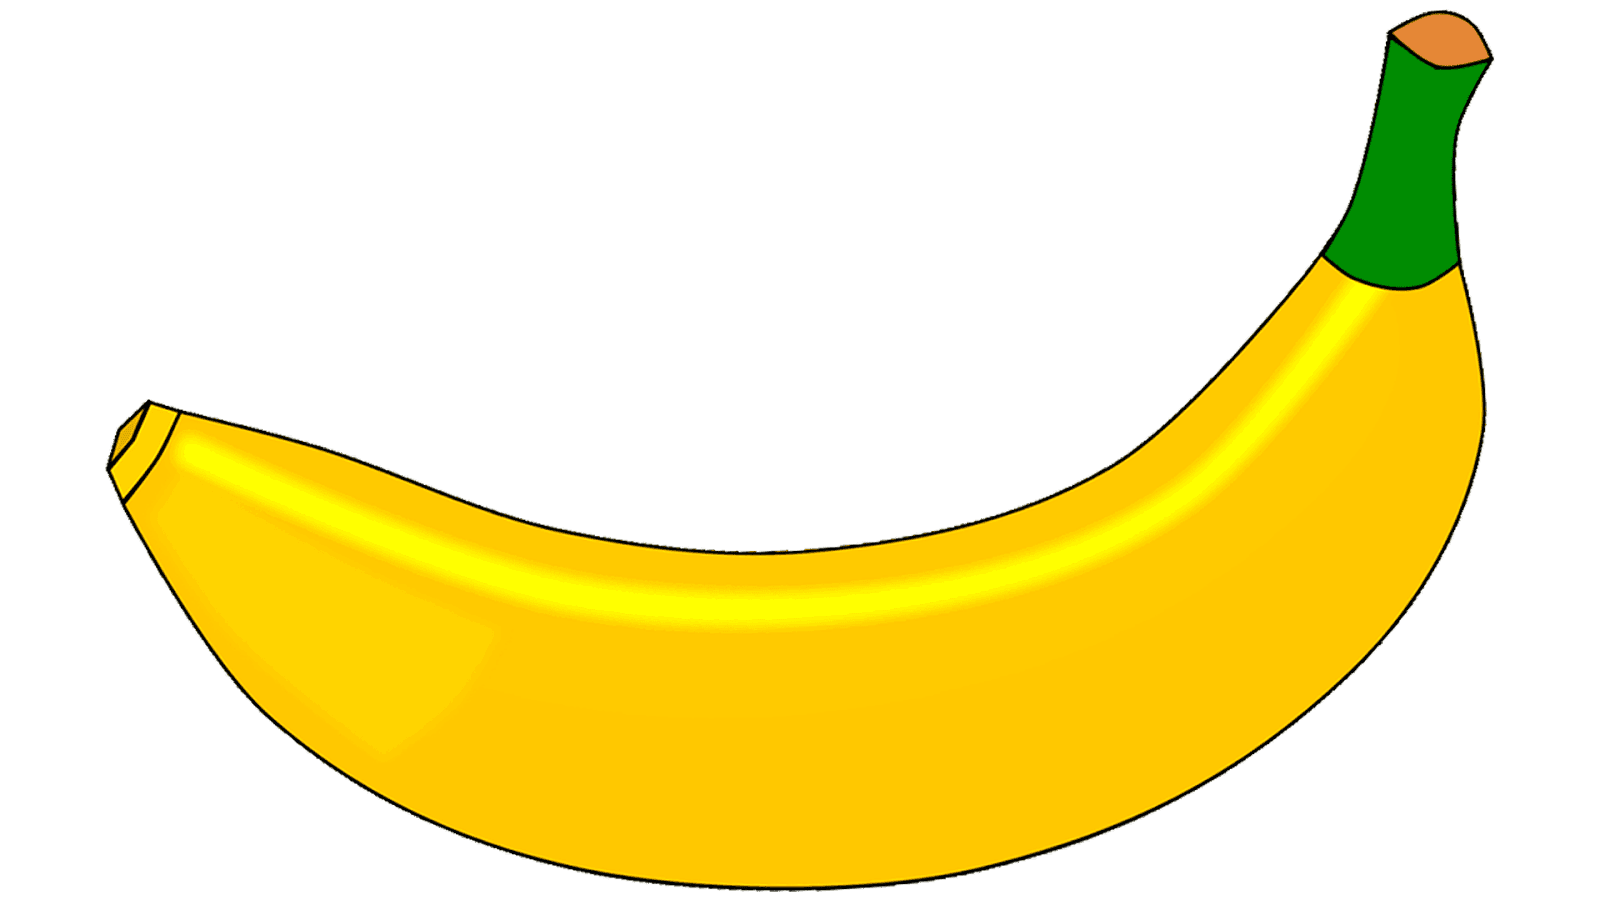 Free Banana Clipart cute, Download Free Clip Art on Owips